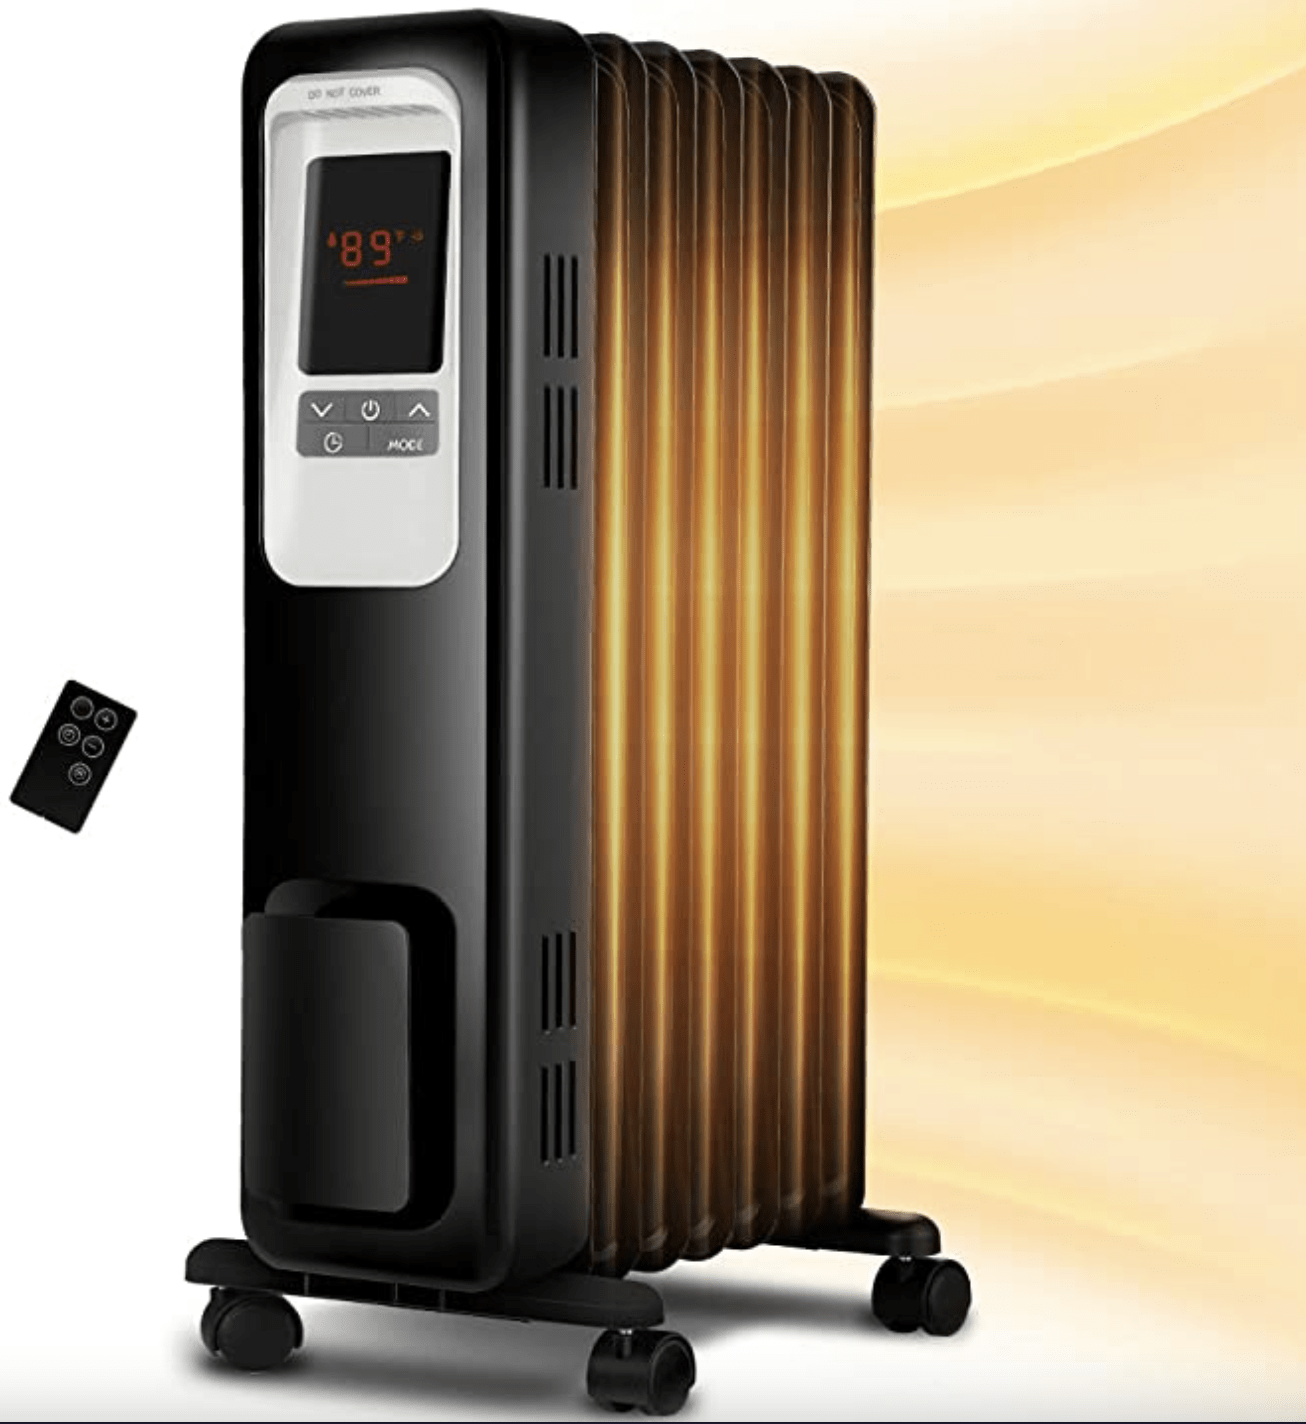 IDEAL HEATER'S CHARACTERISTICS FINALLY UNVEILED… THE BEST HEATERS